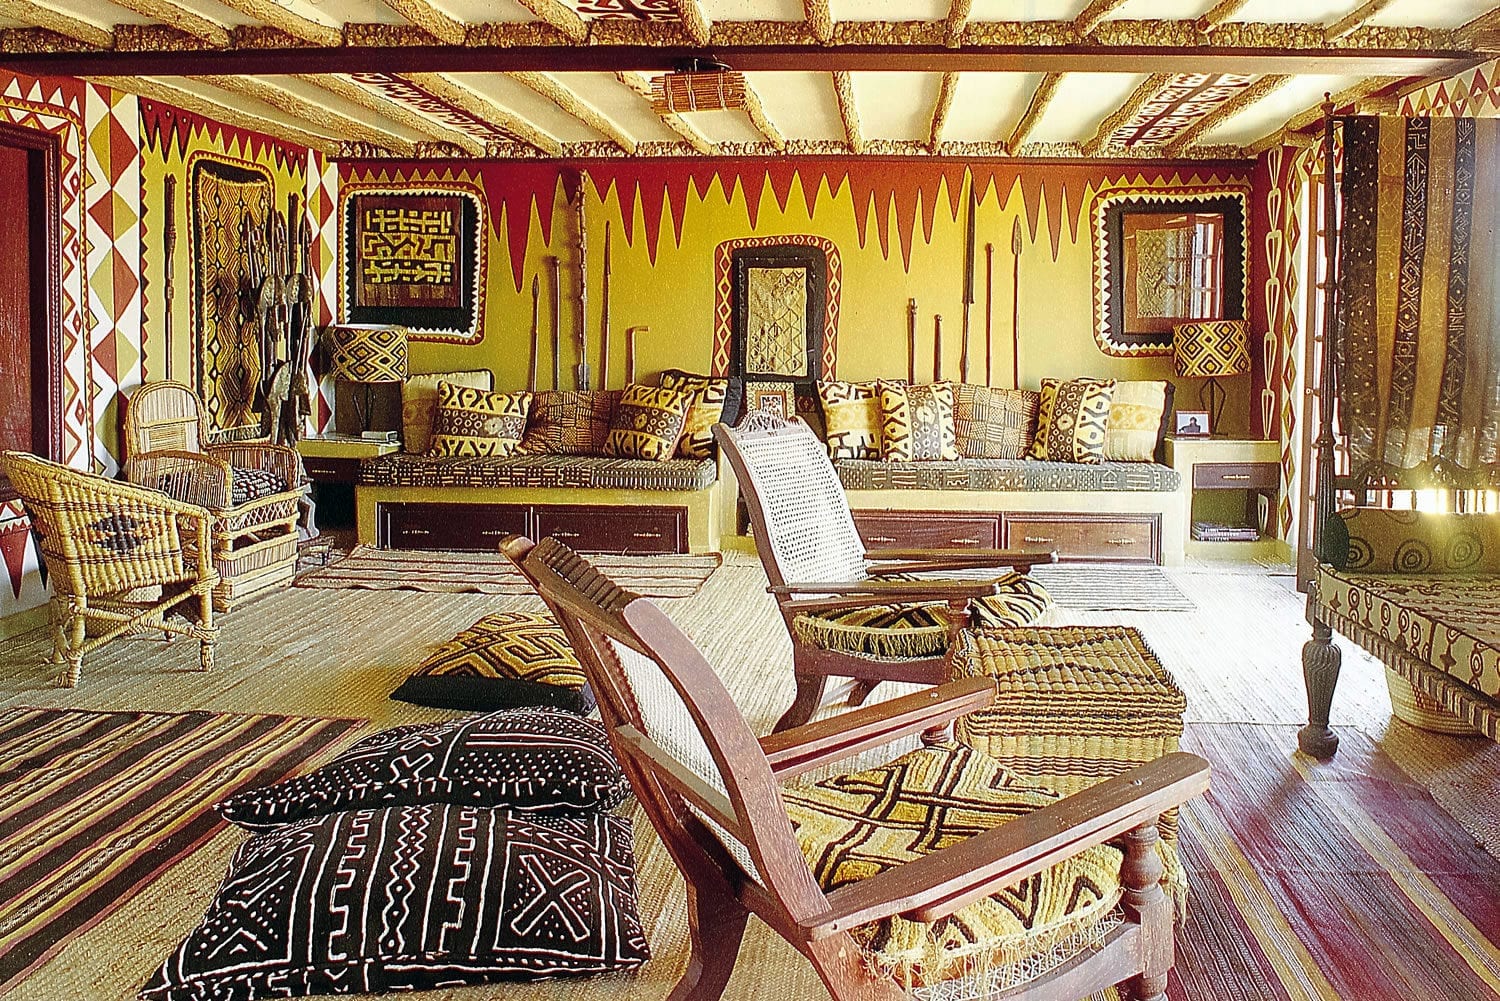 Roof room hand painted by Carol Beckwith and artists of African Heritage.